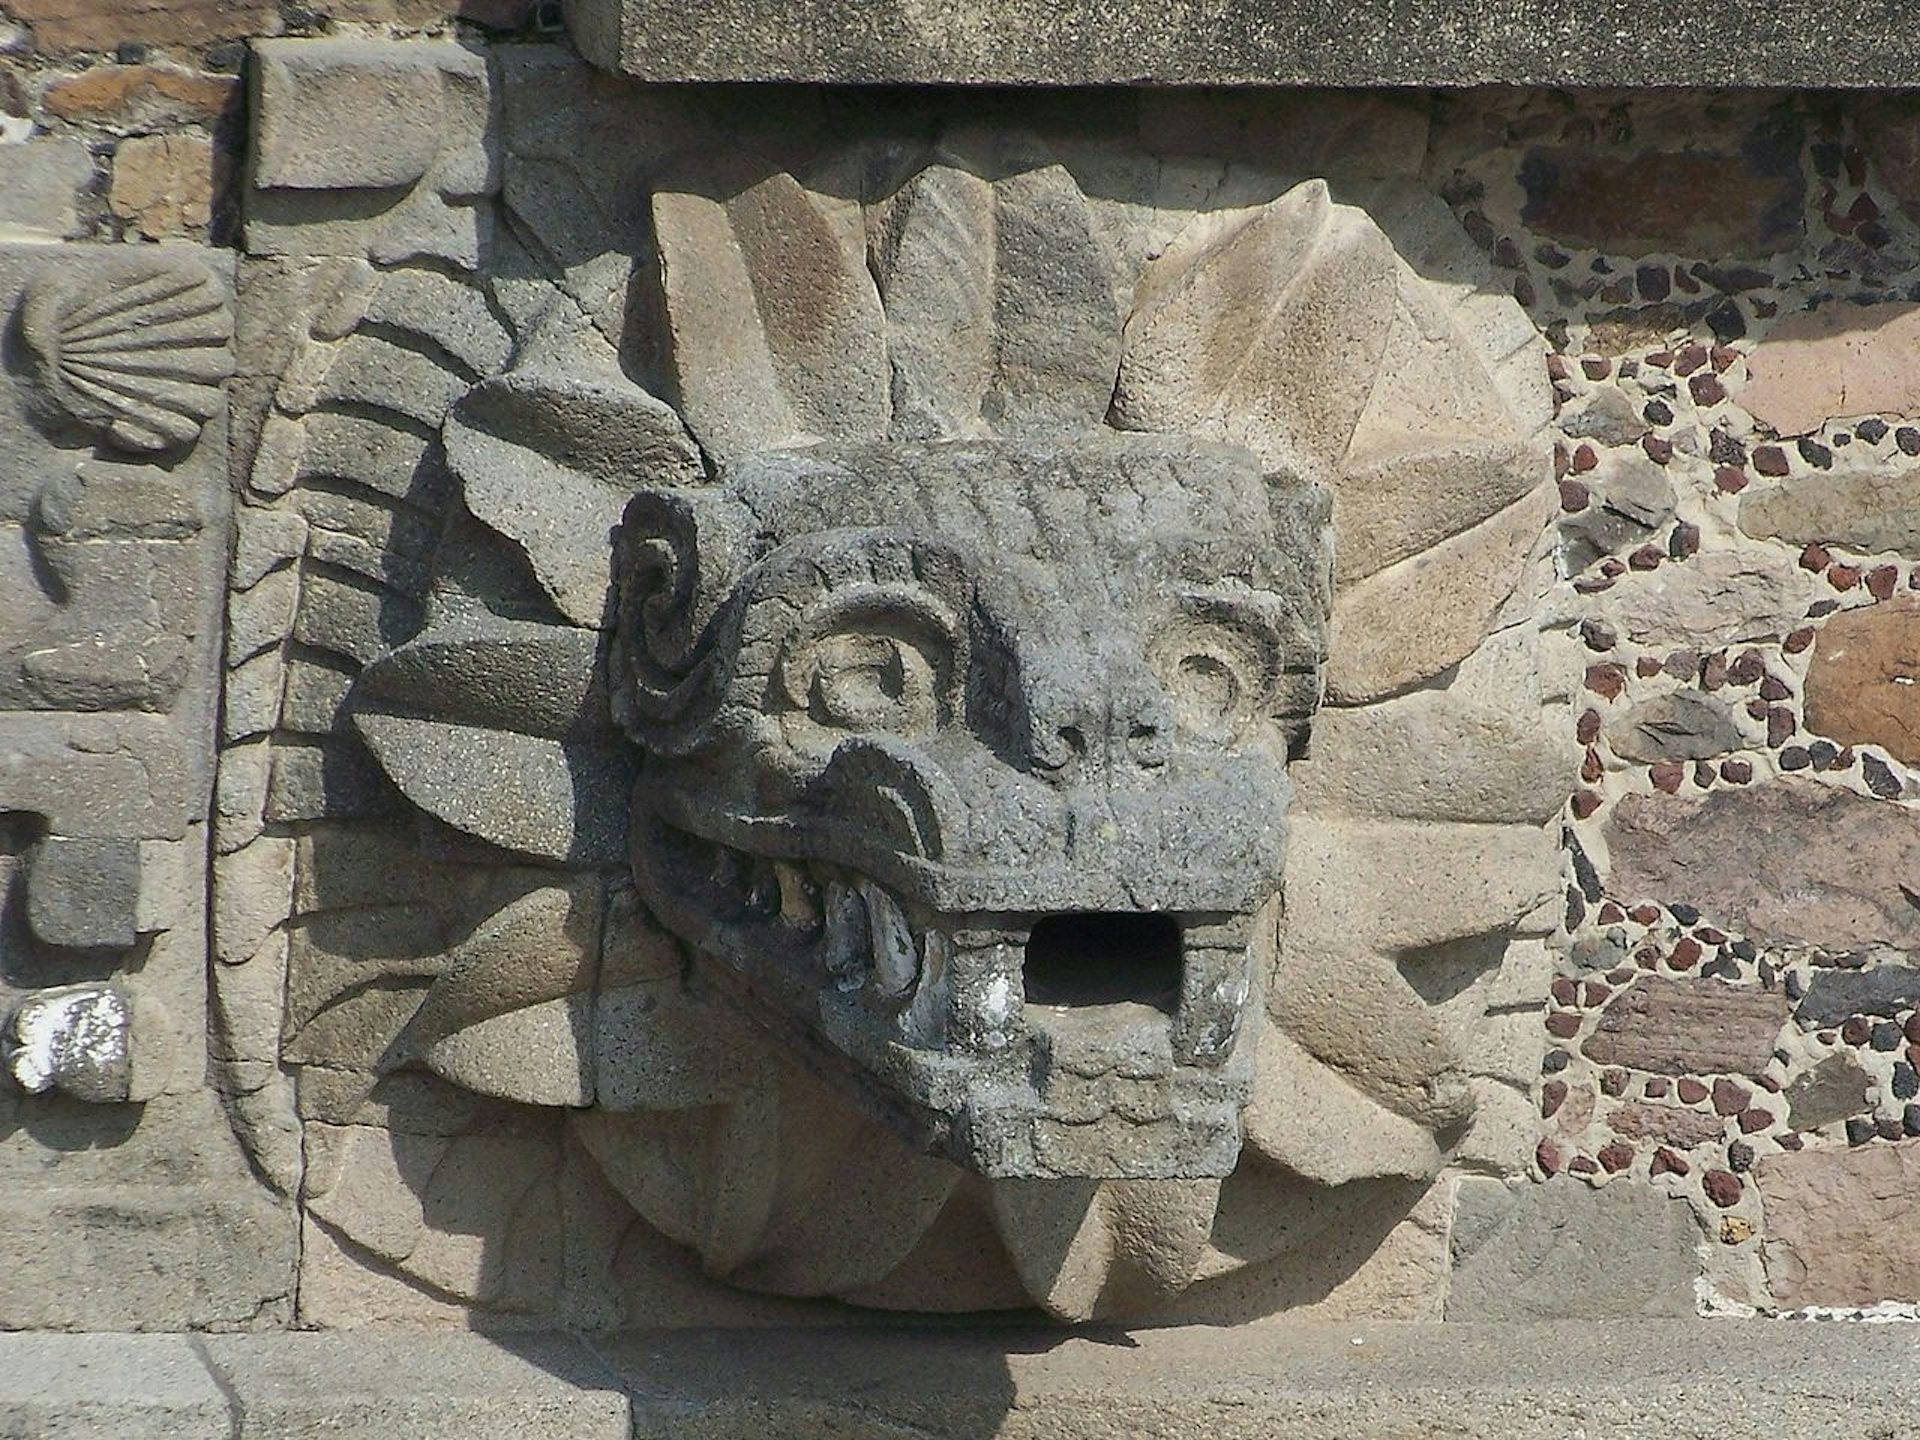 Teotihuacan Feathered Serpent (Jami Dwyer)